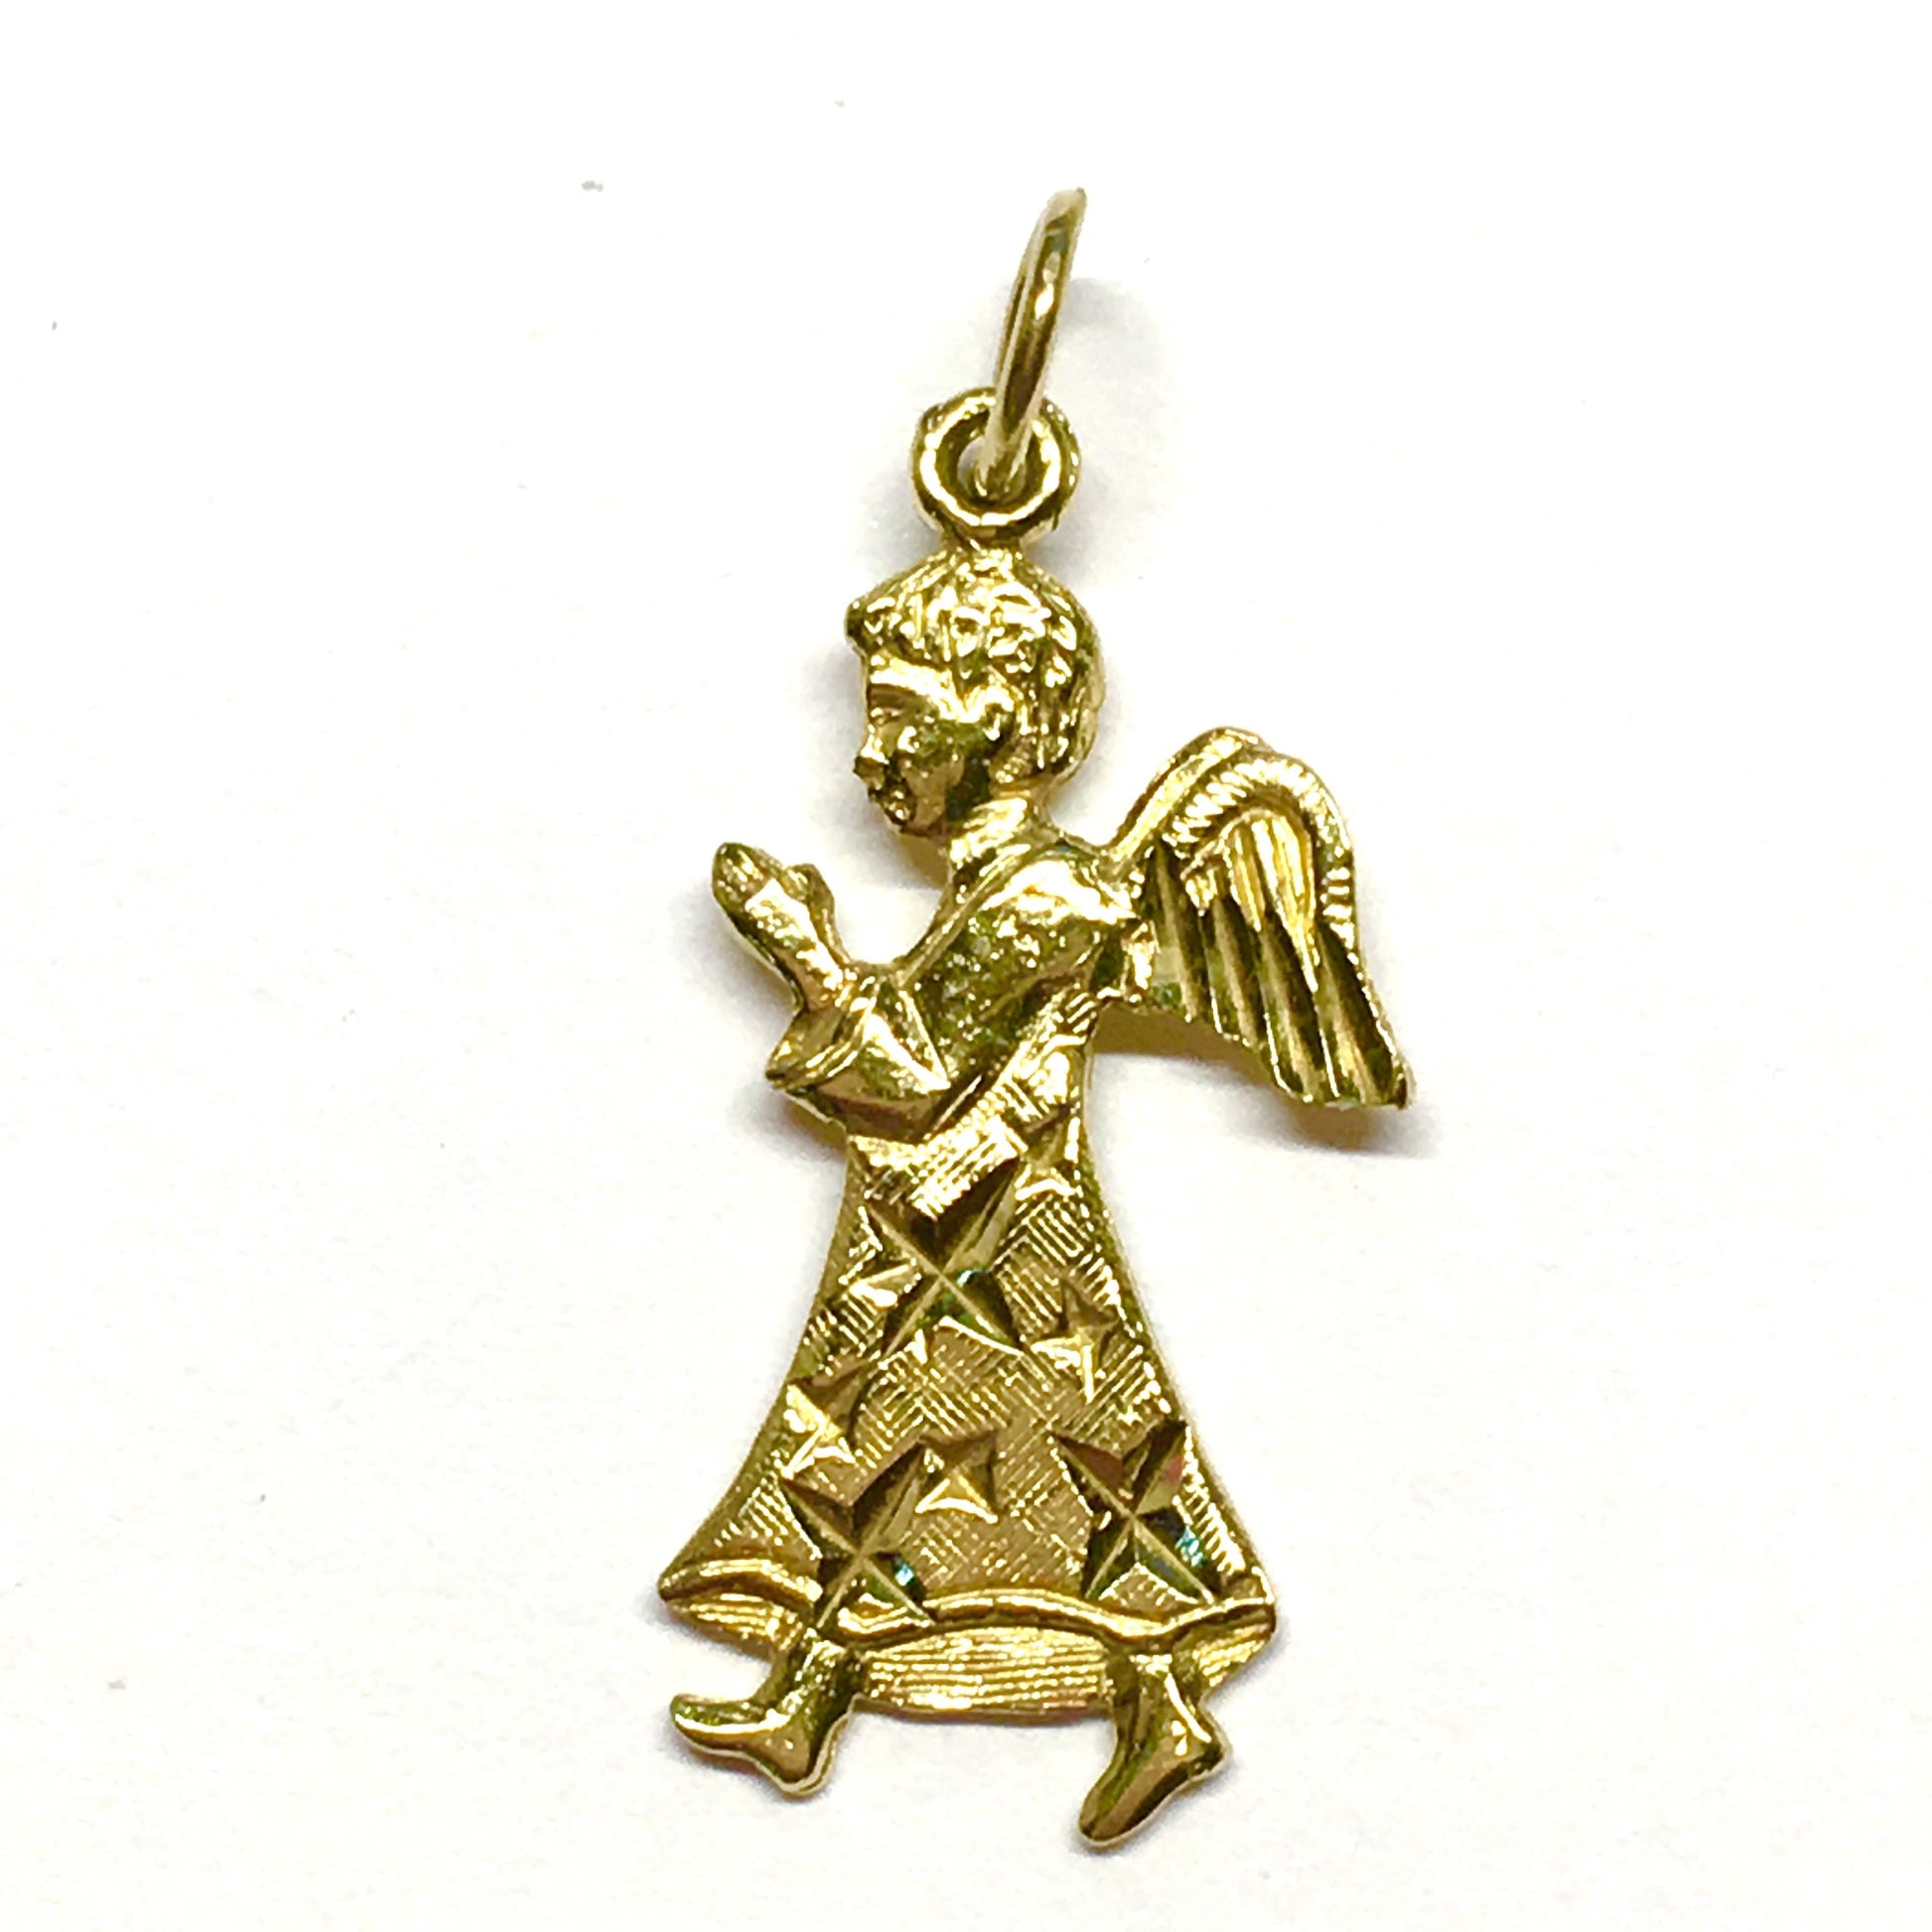 Charm - Mens or Womens Praying Angel Pendant - 14k Gold Diamond Cut Angelic Child Charm - Discount Estate Jewelry at Blingschlingers